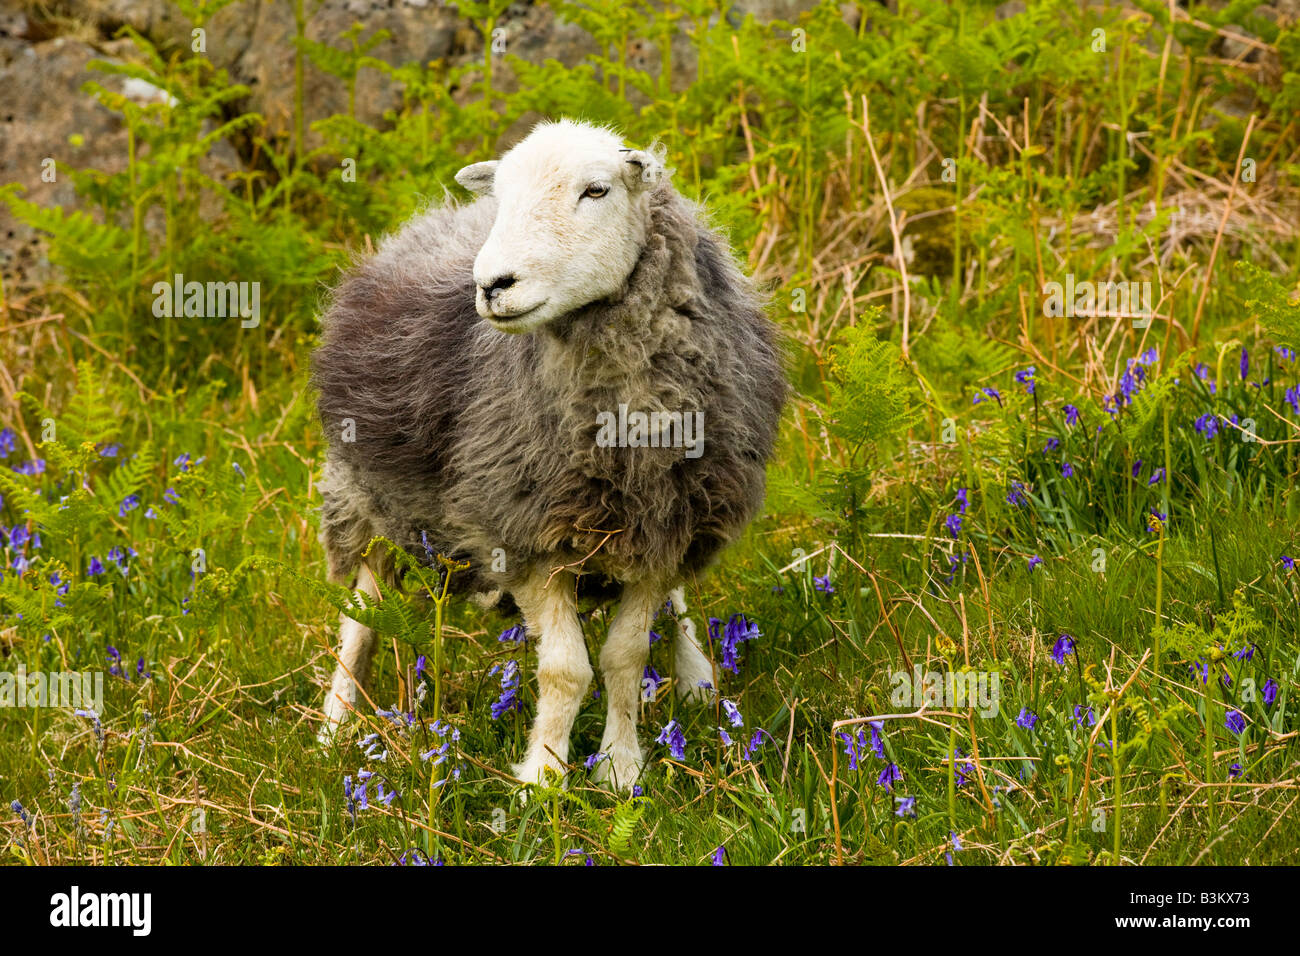 England, Cumbria, Lake District National Park. Sheep and a blanket of bluebells on a fell near Dunnerdale Forest. Stock Photo